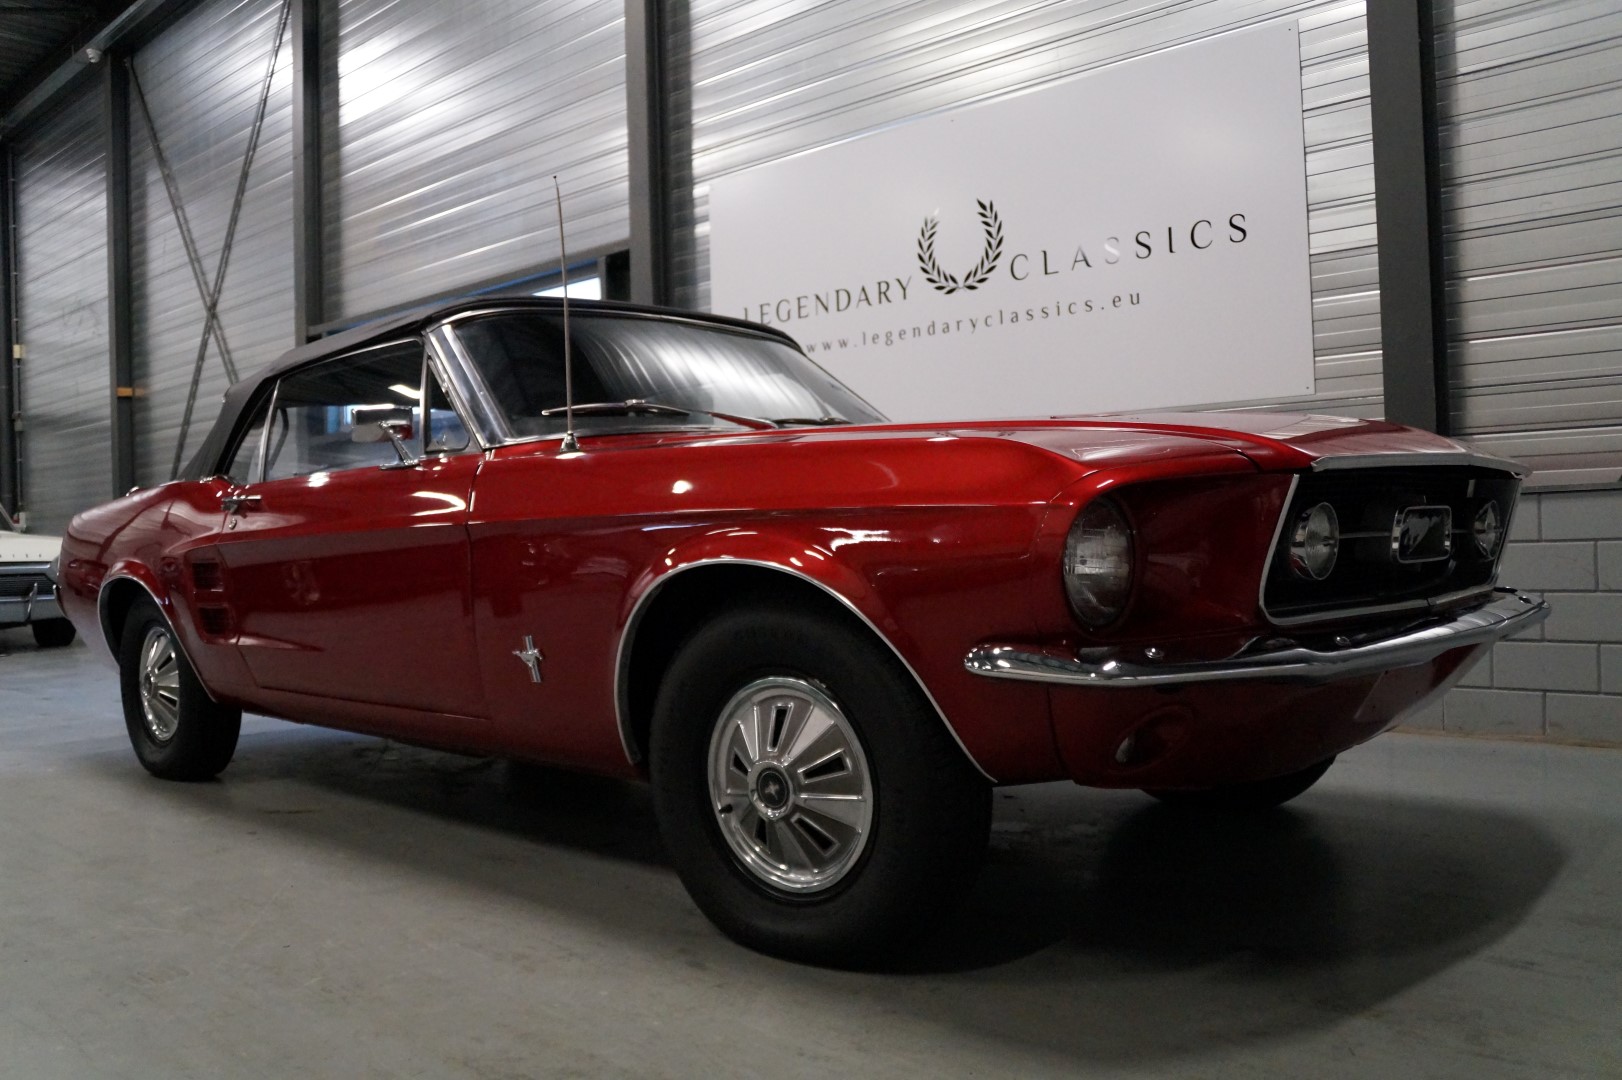 Buy this Ford Mustang   at Legendary Classics (1)